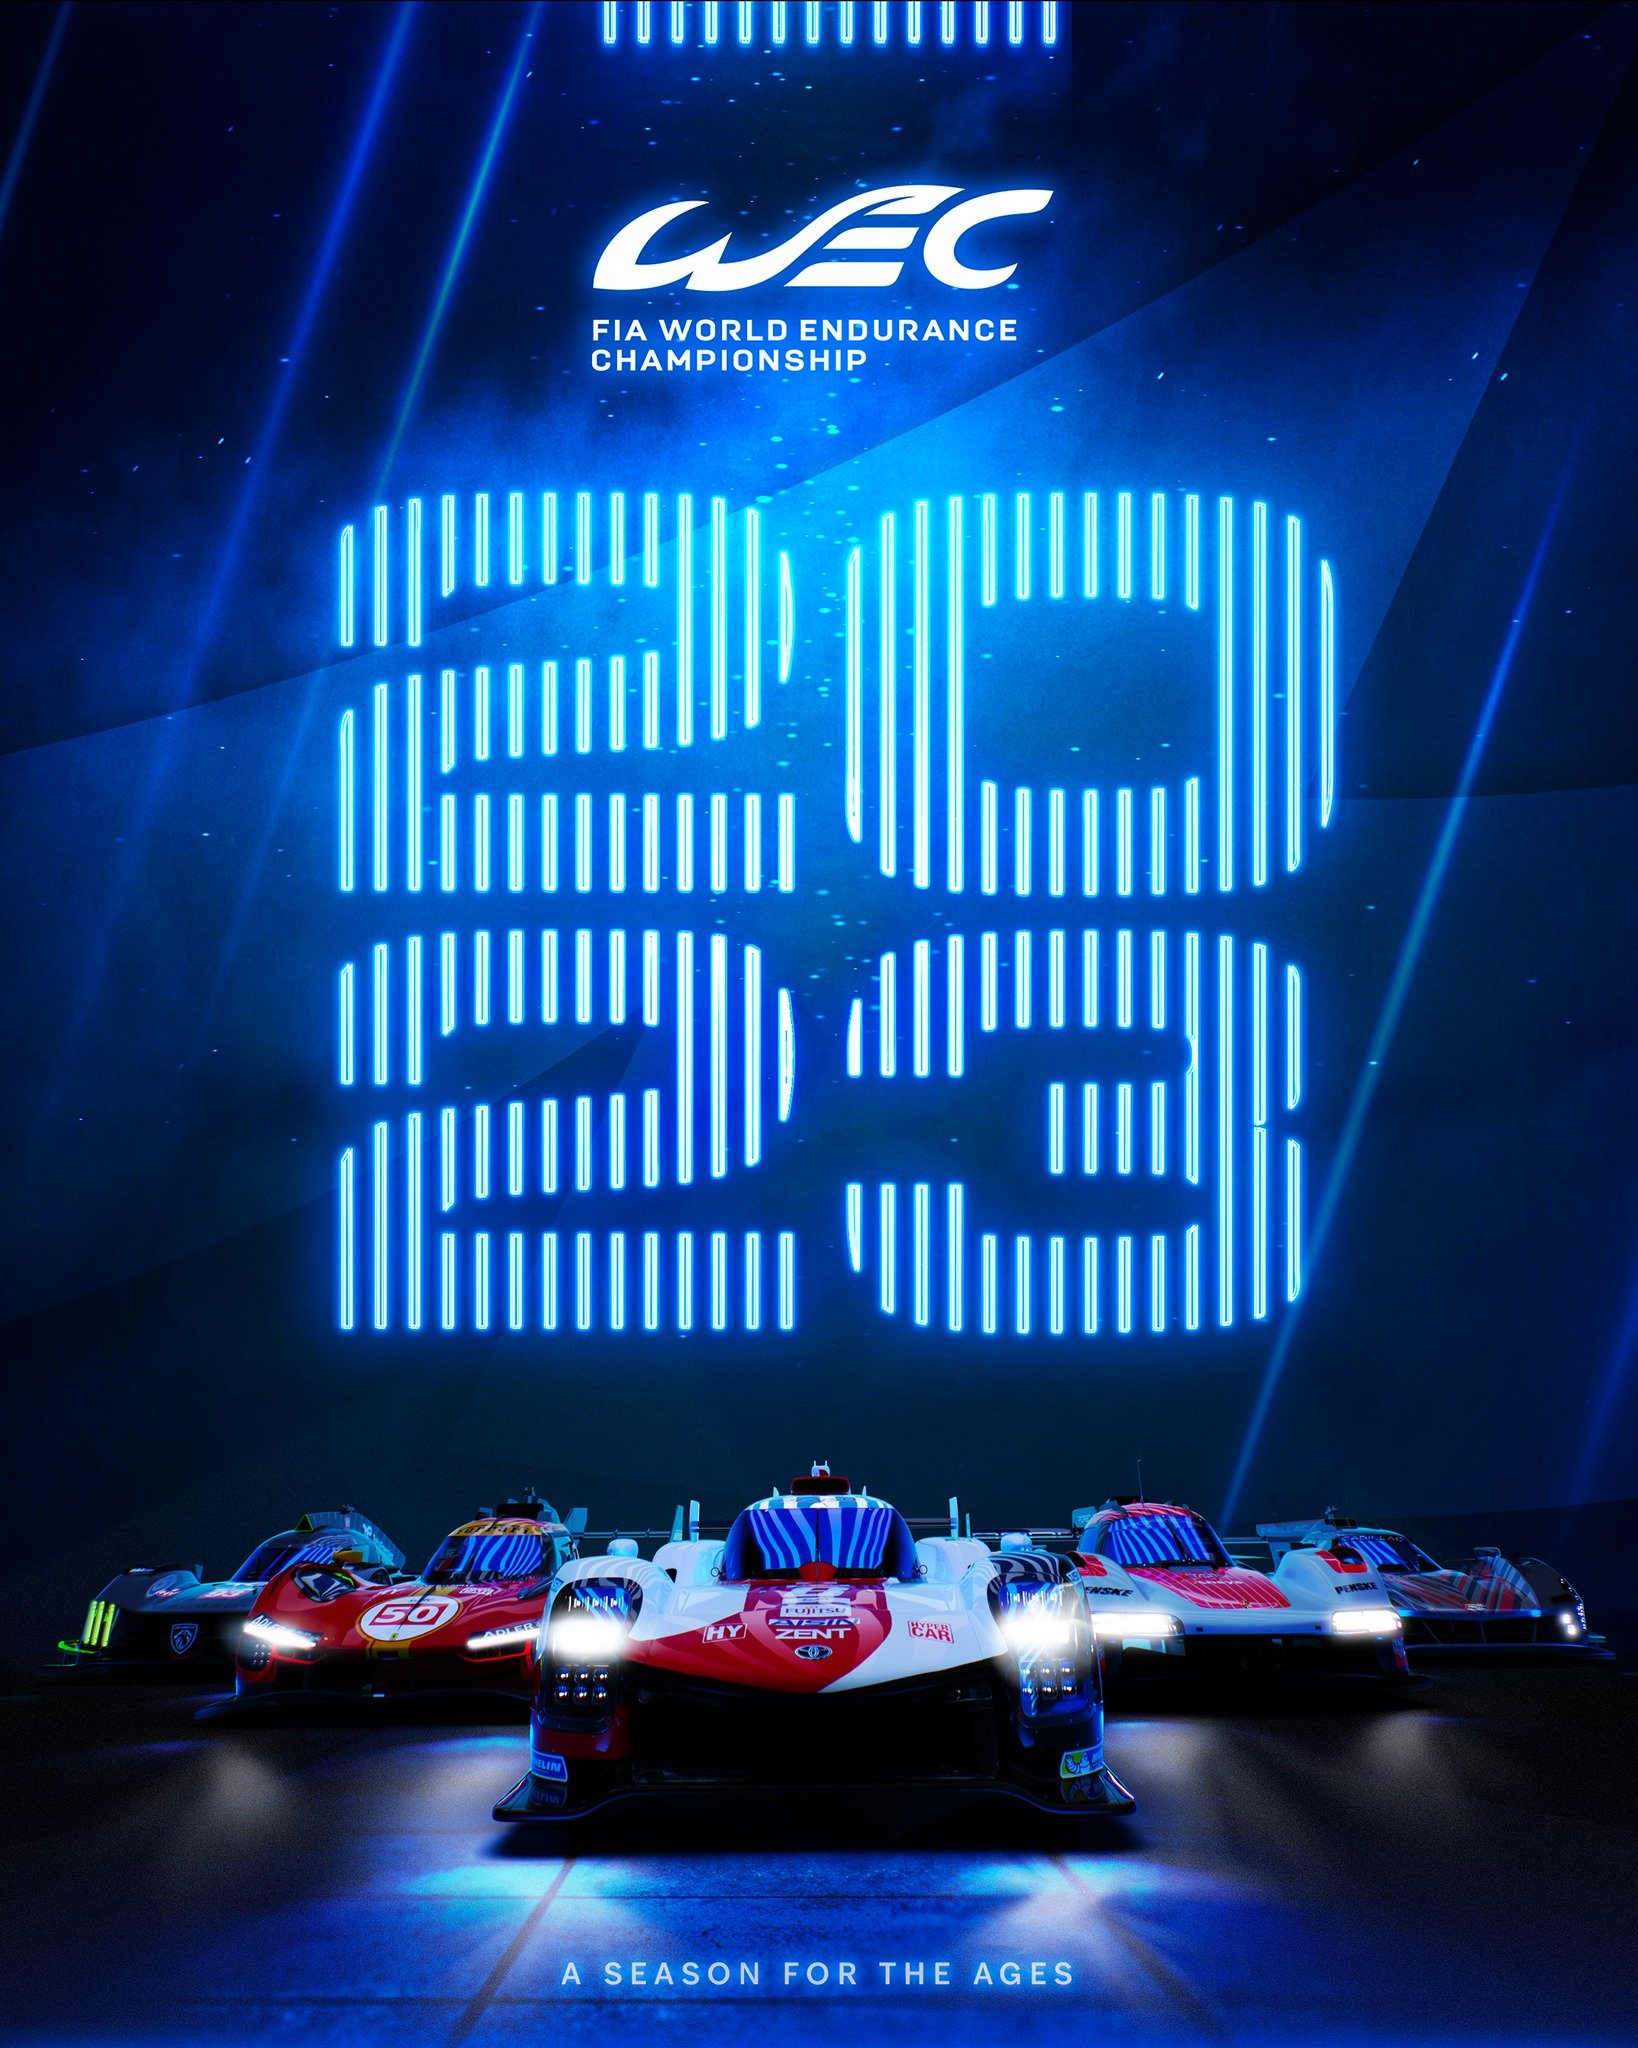 FIA WEC - The Hype is coming to Sebring. 🇺🇸 The 2023 FIA World